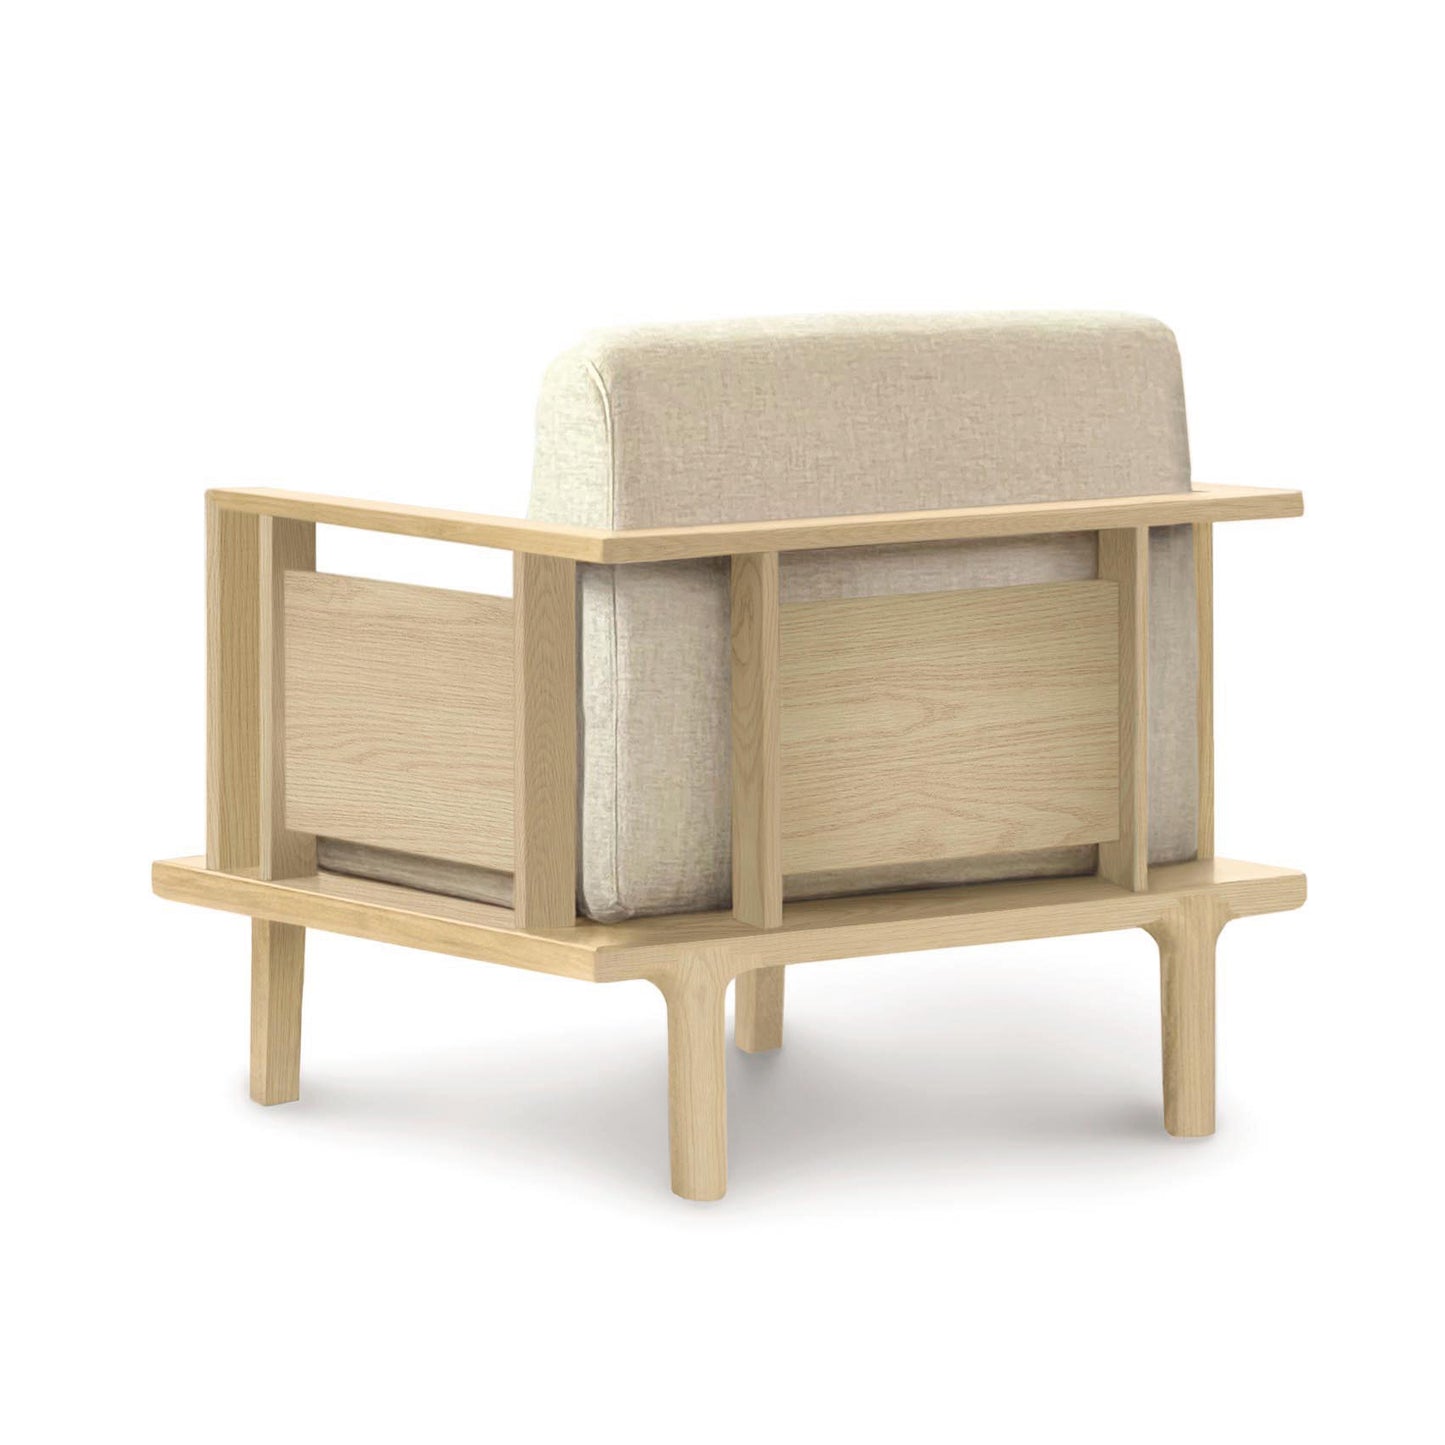 A modern Copeland Furniture Sierra Oak Upholstered Chair with custom upholstery, isolated on a white background.